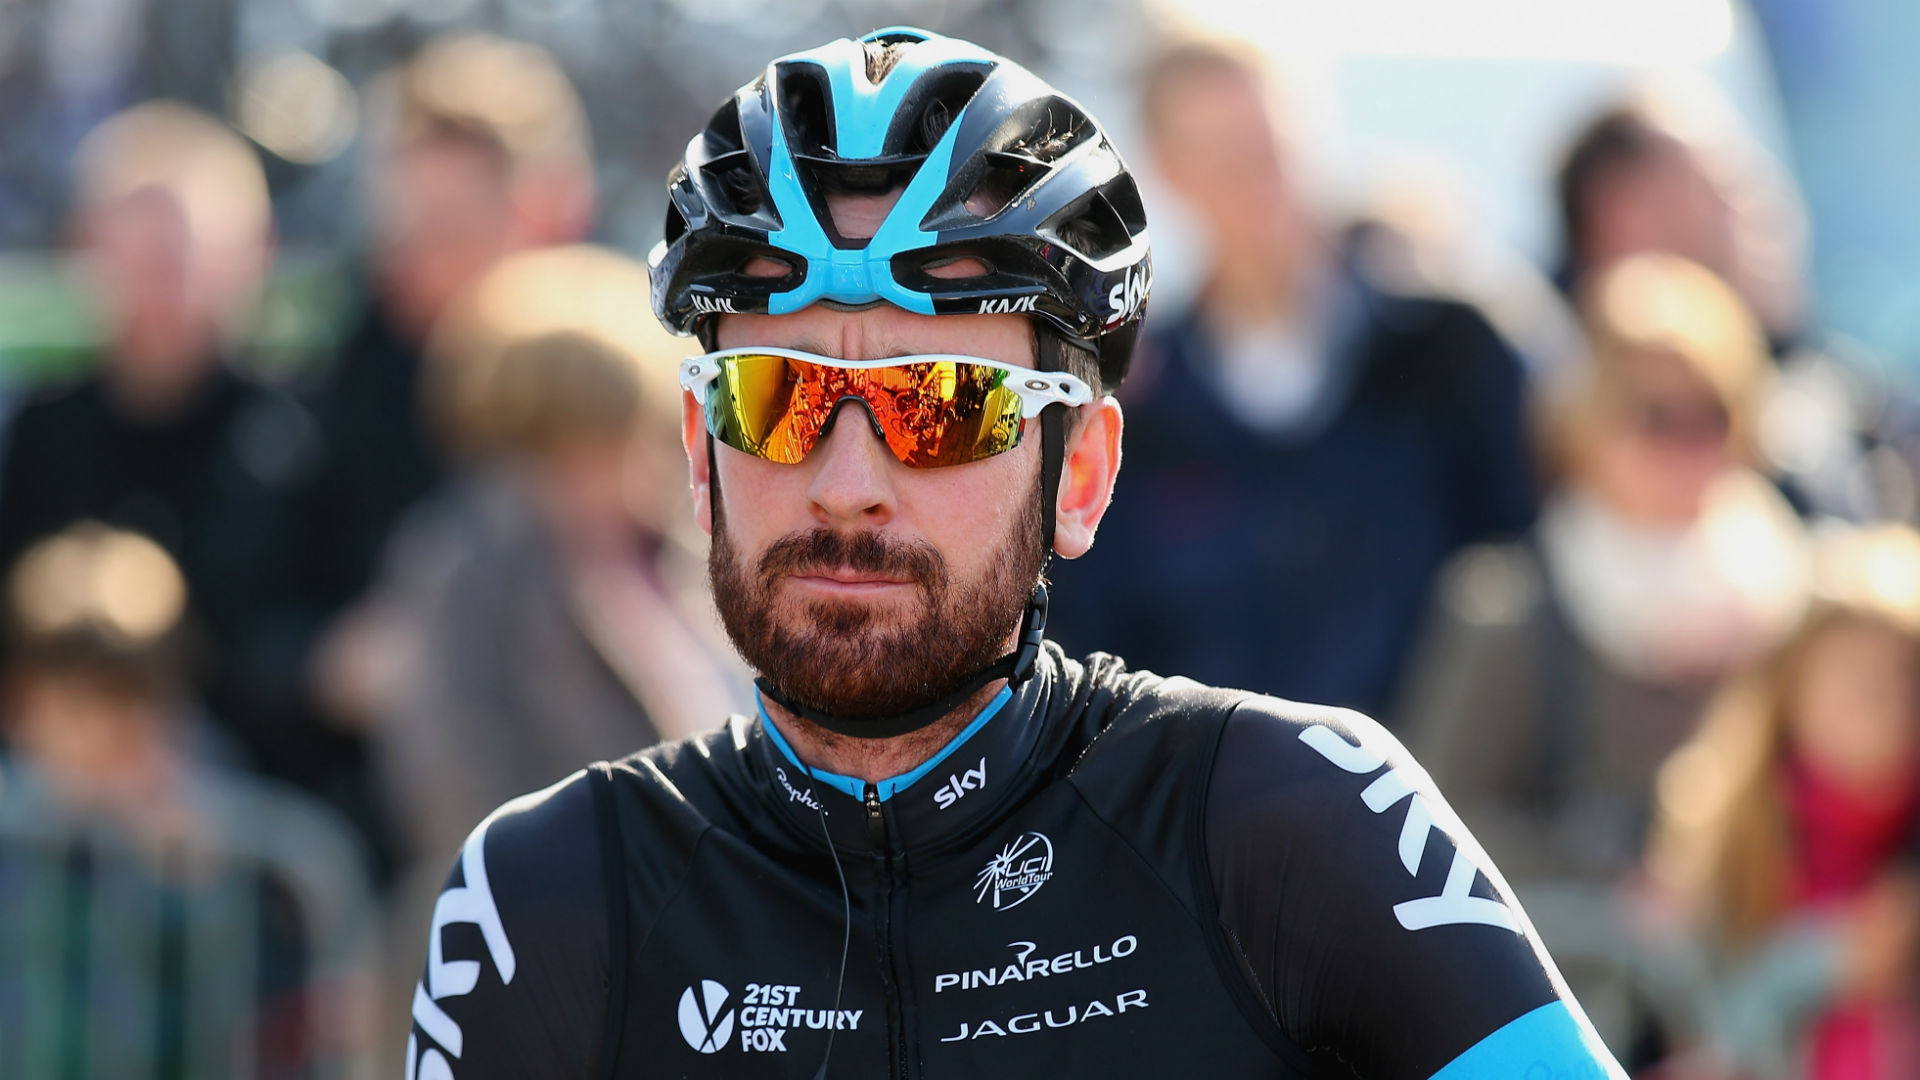 An agreement between Team Sky and Ineos for a naming agreement would suit both Dave Brailsford and Jim Ratcliffe, says Bradley Wiggins.